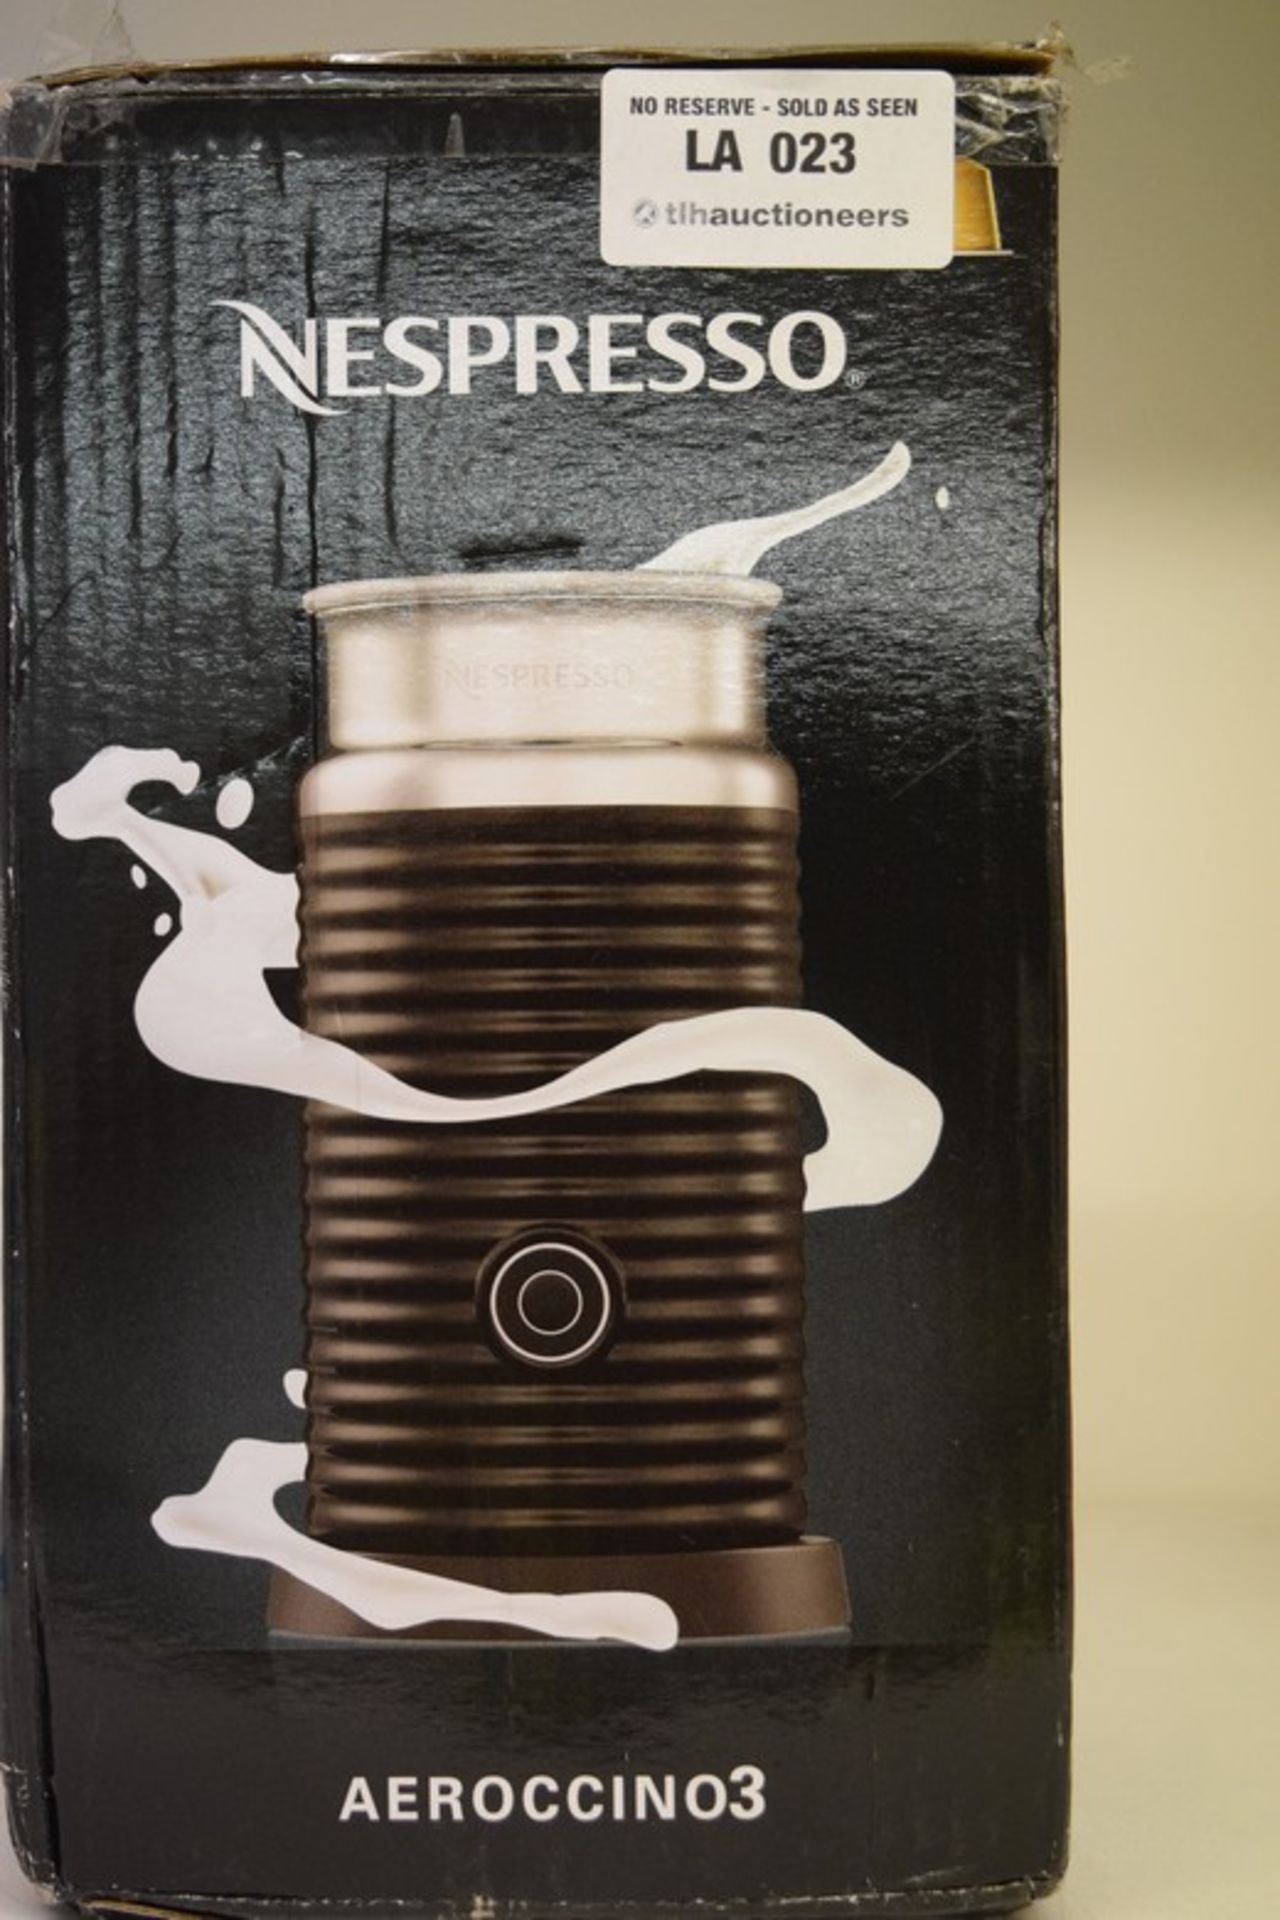 1 x NESPRESSO AEROCHINO3 MILK FROTHER RRP £60 16/11/16 *PLEASE NOTE THAT THE BID PRICE IS MULTIPLIED